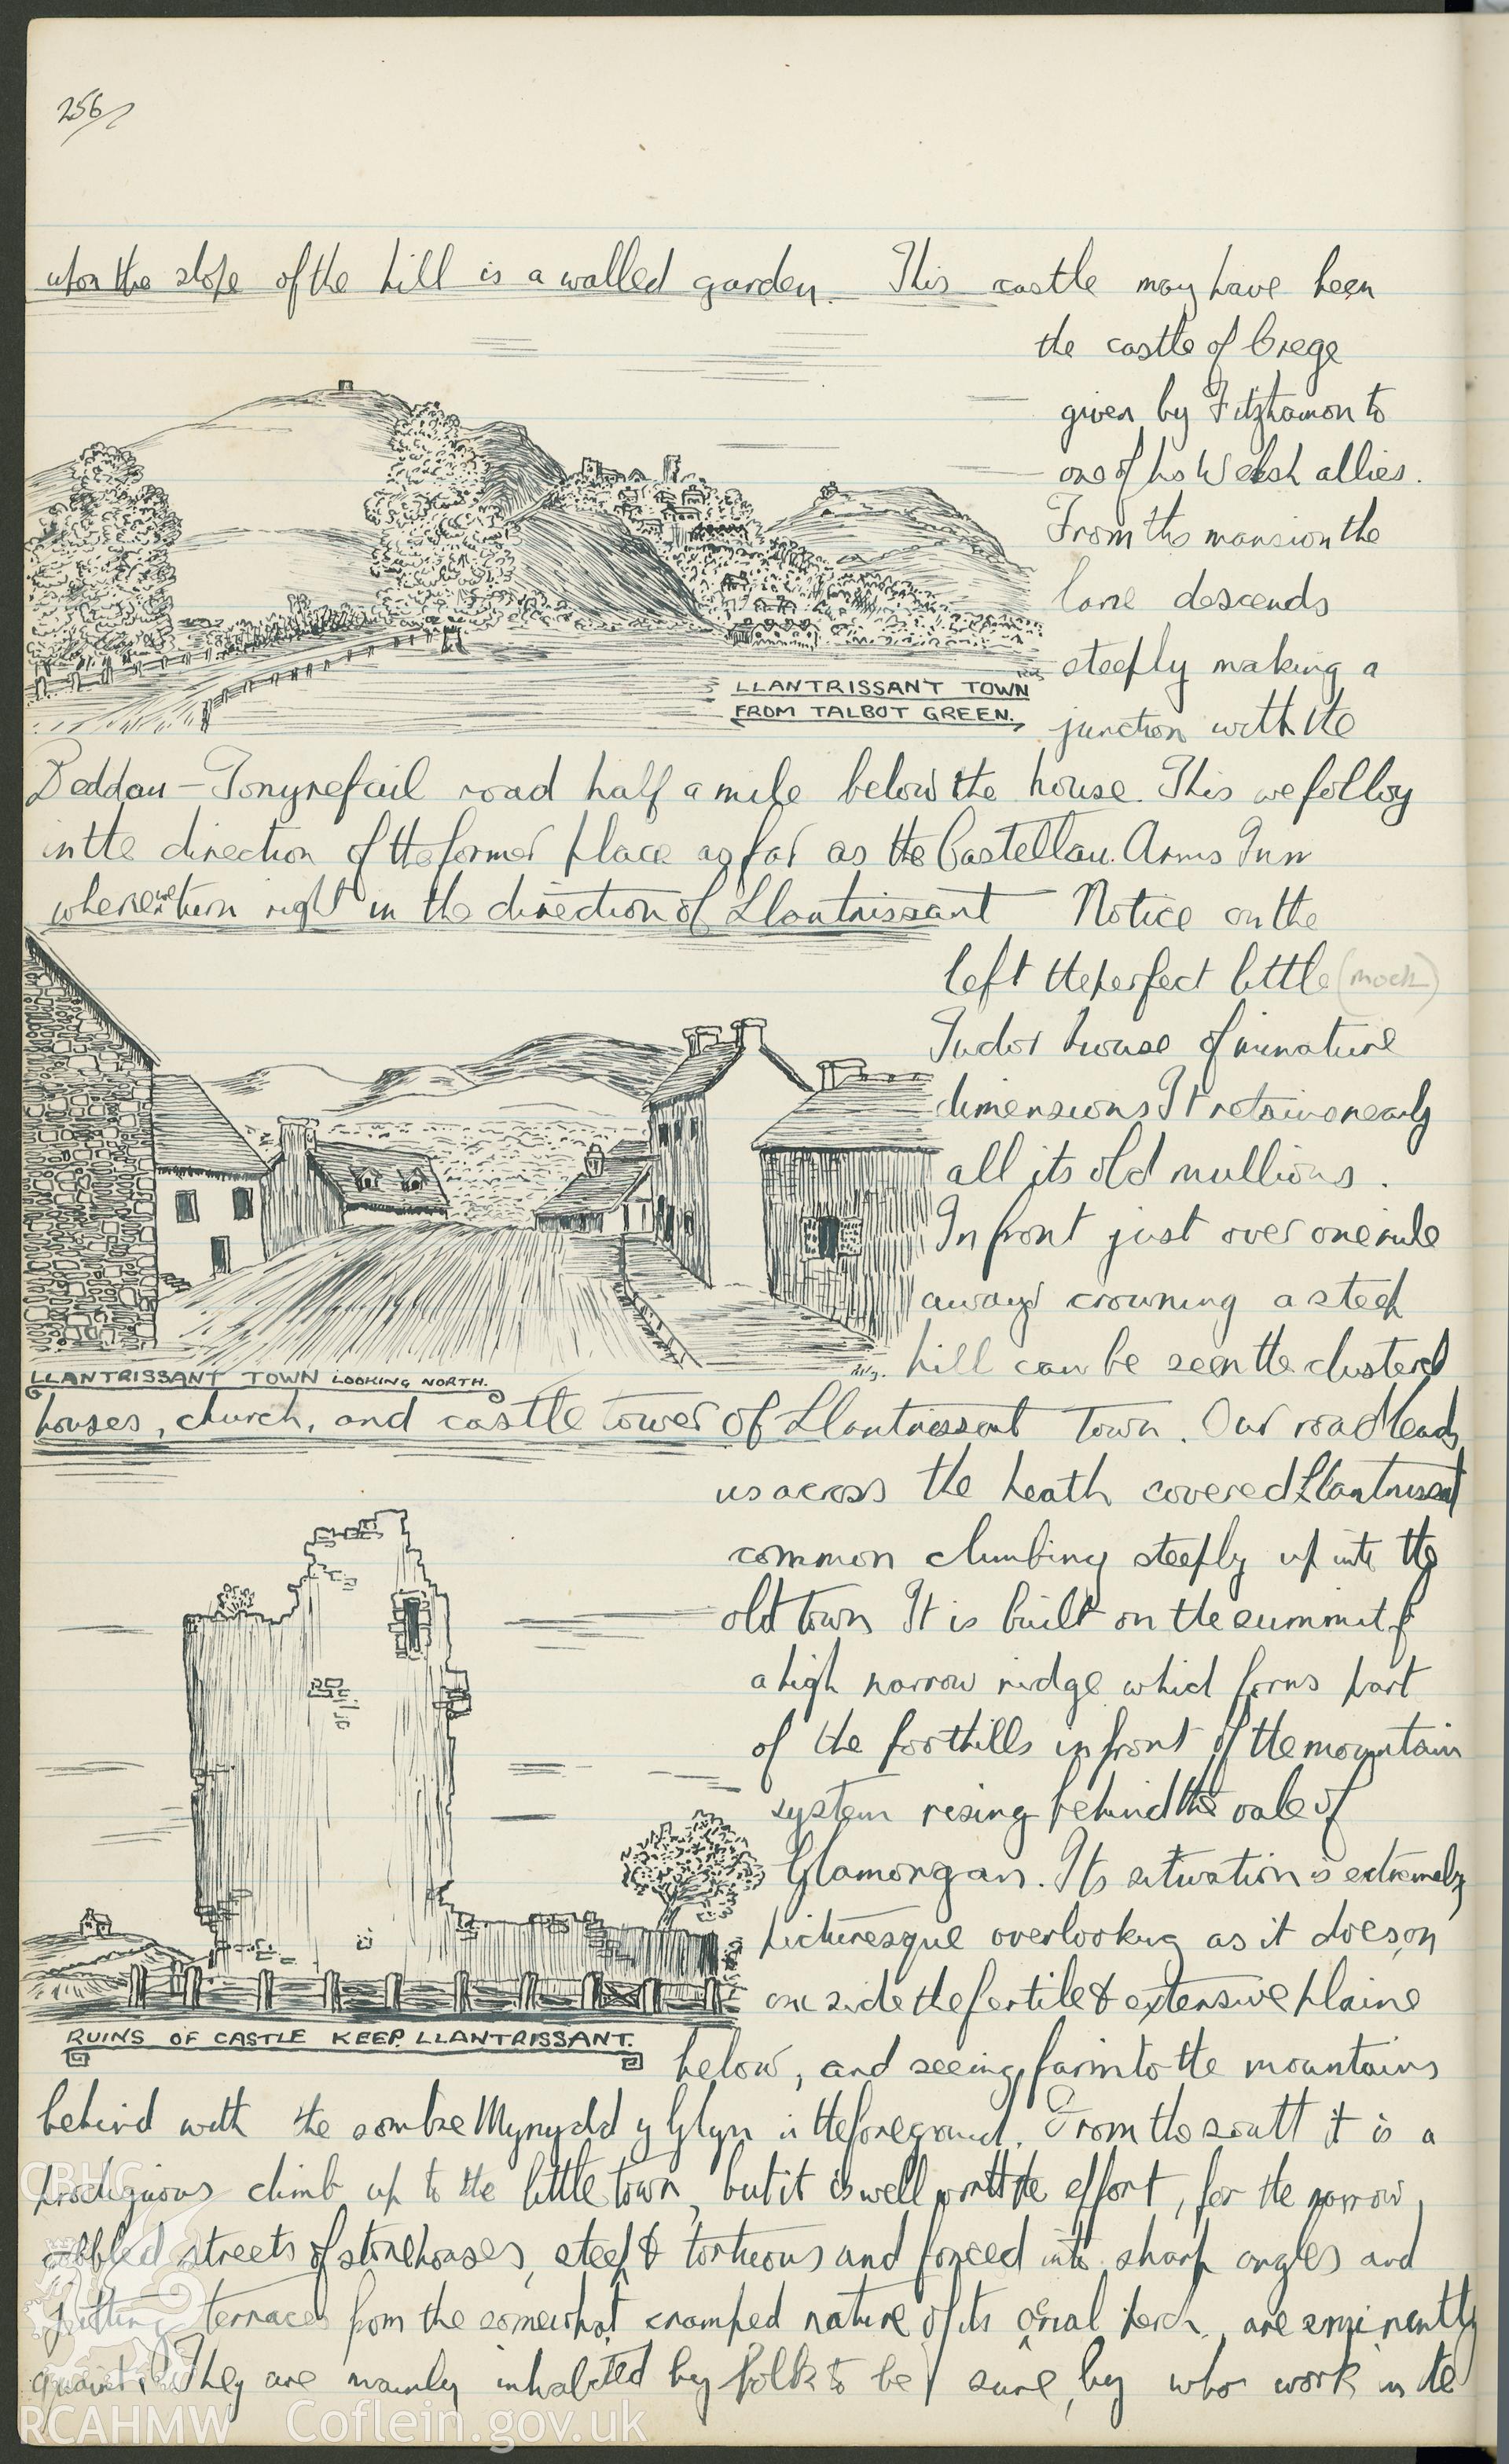 Page from a notebook featuring an illustration by R.E. Kay showing Llantrisant Castle and views of the town of Llantrisant. As featured on p256 of R.E. Kay Notebook Series I, Vol II.